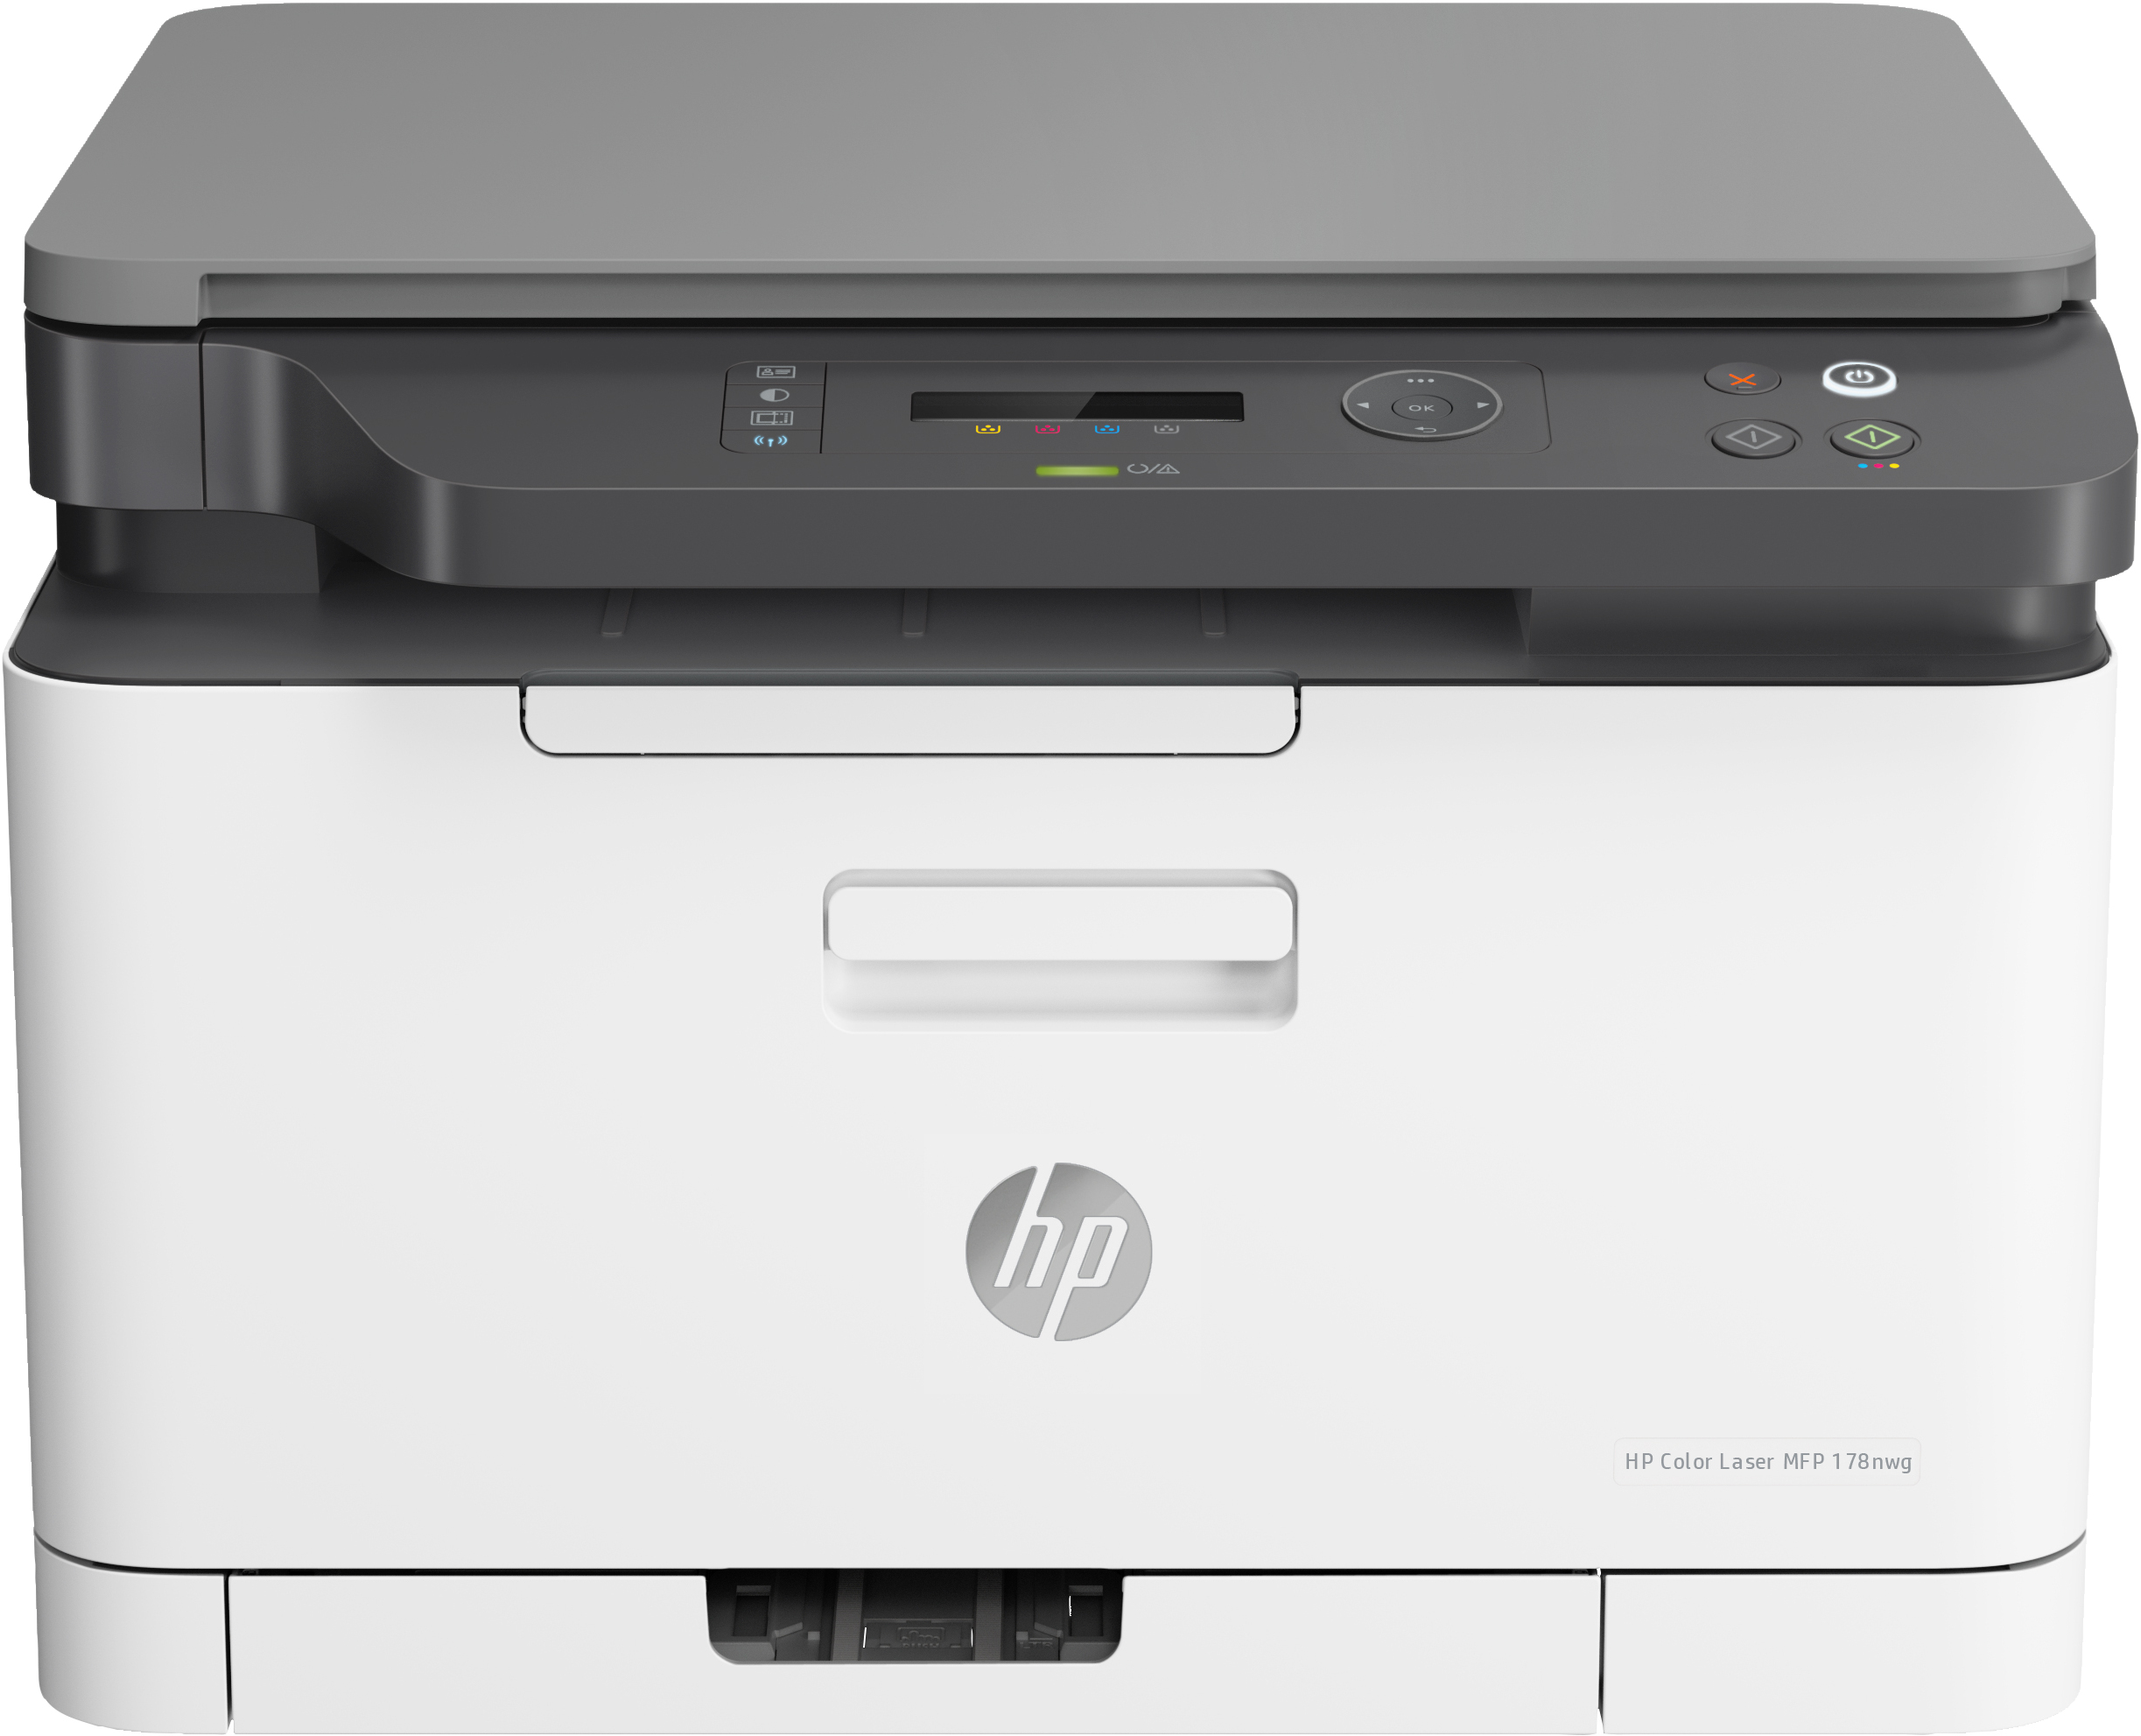 HP Color Laser MFP 178nw - Multifunktionsdrucker - Farbe - Laser - A4 (210 x 297 mm)